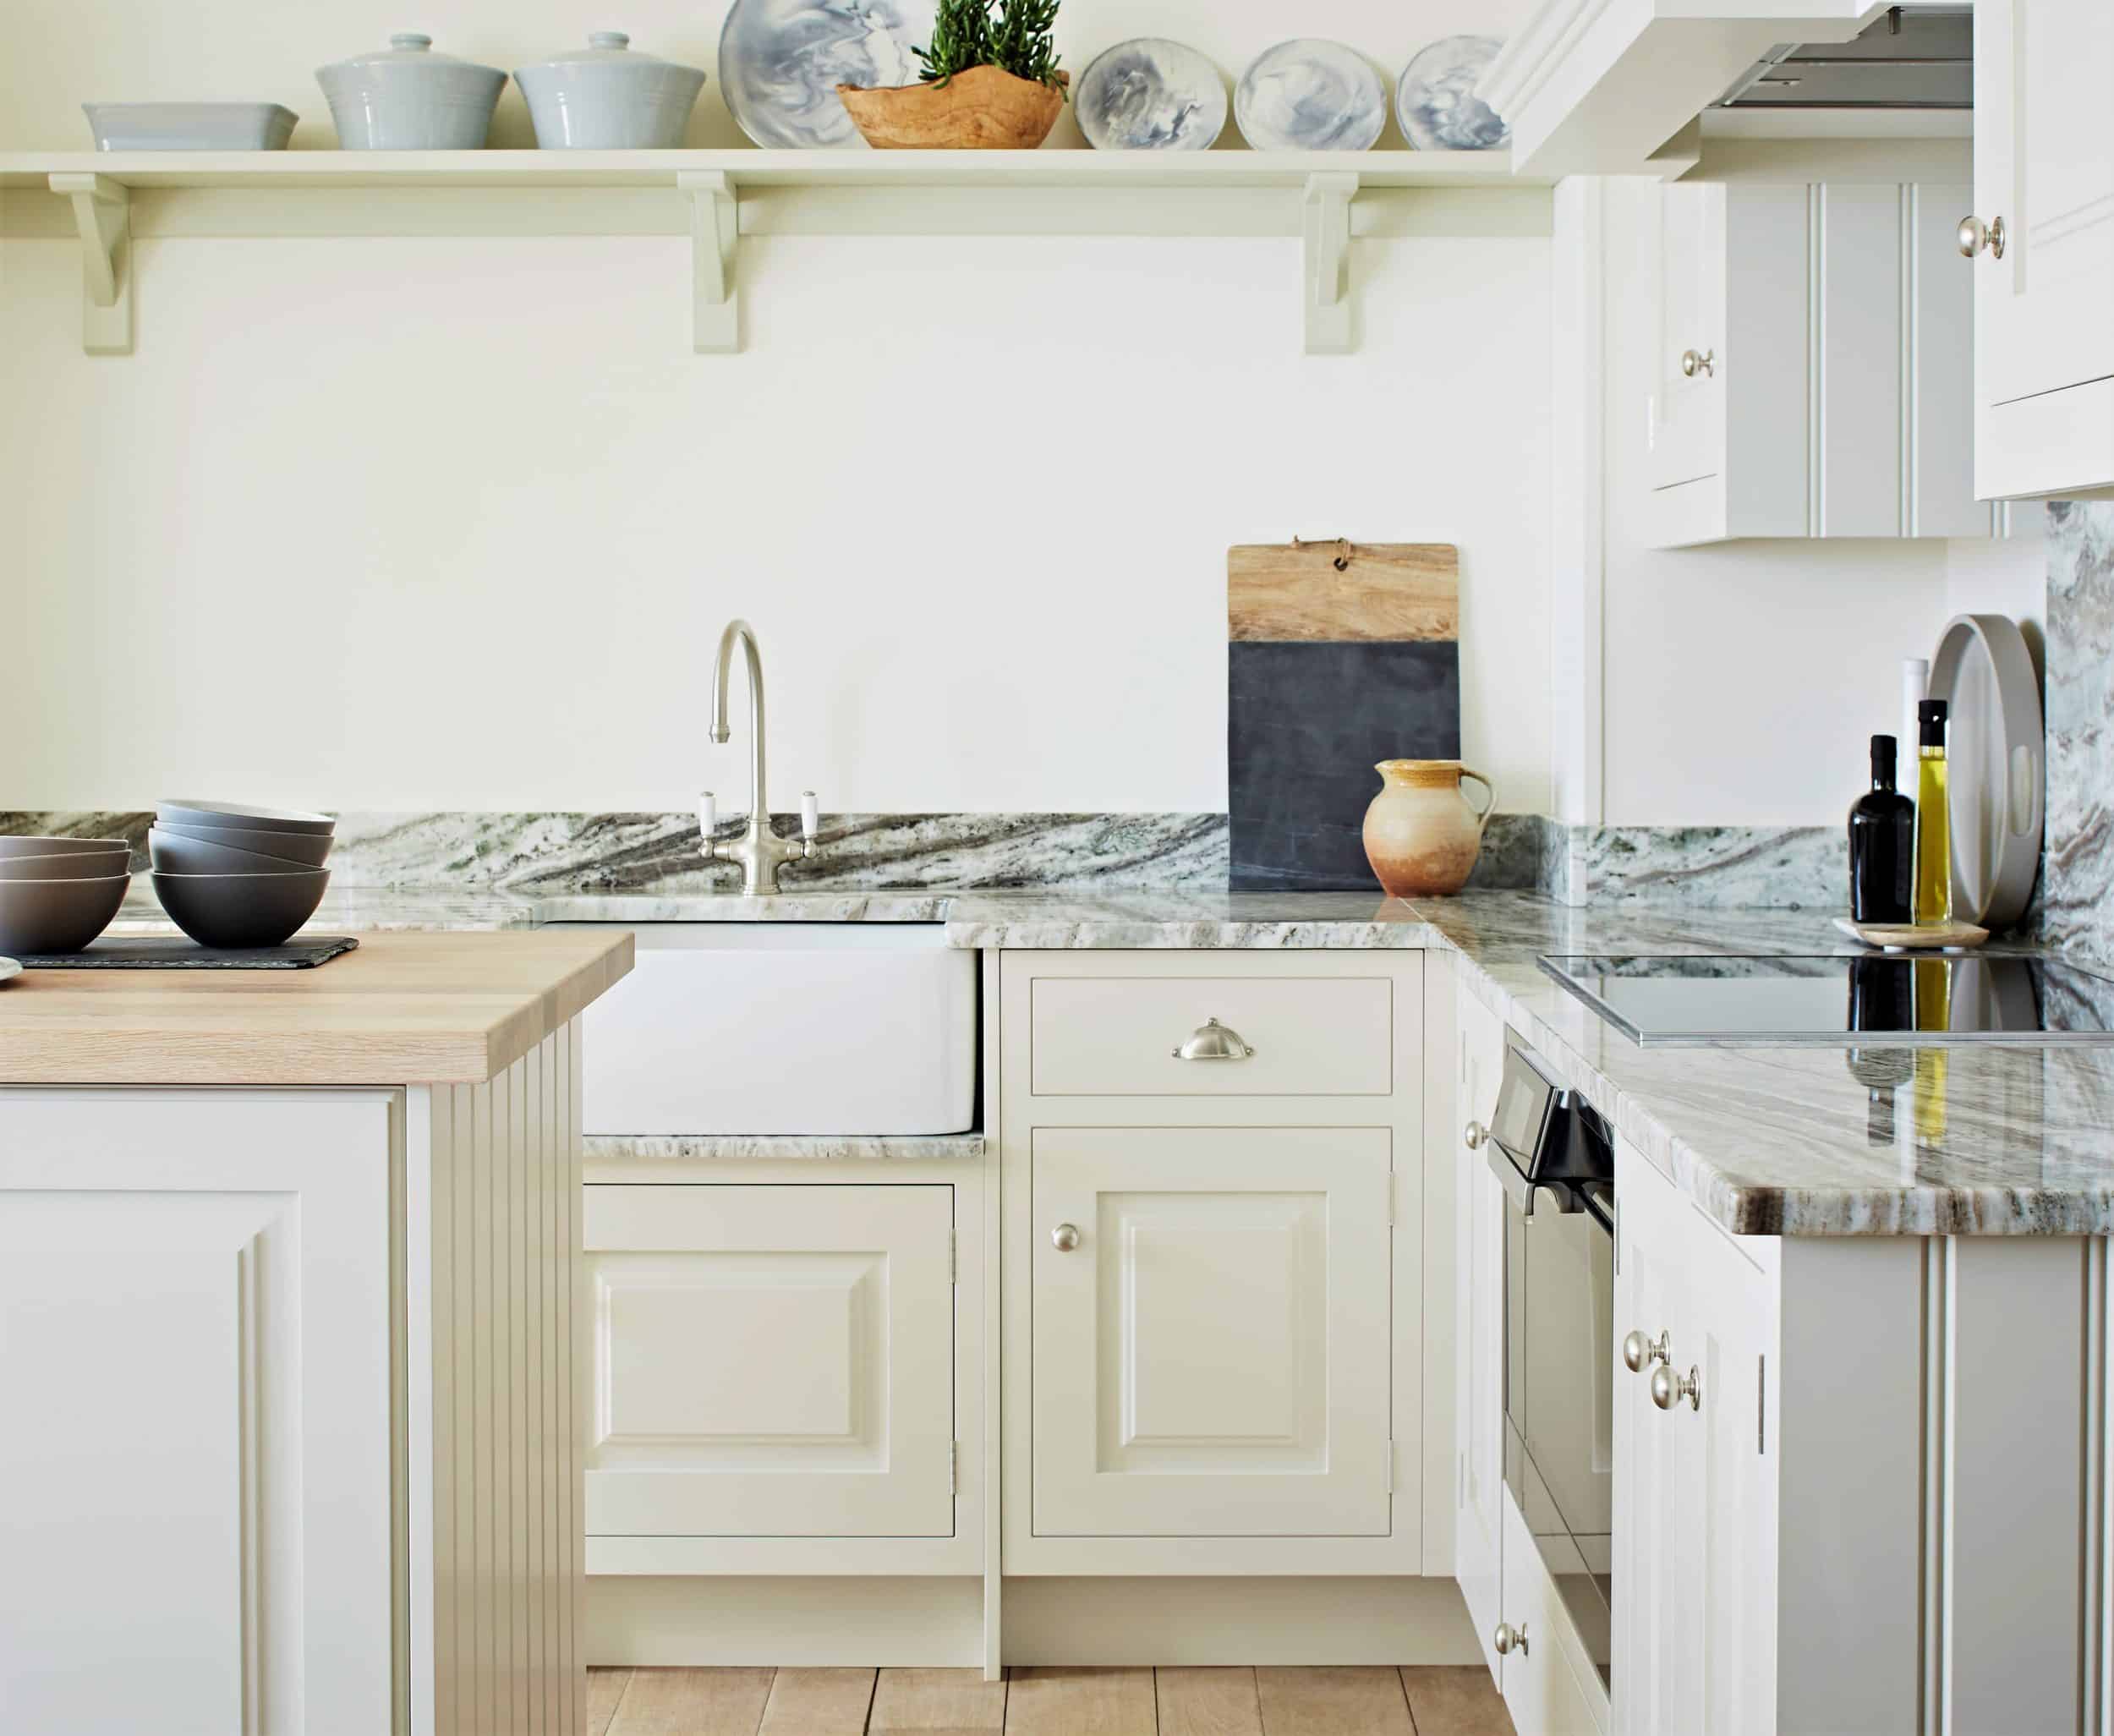 Traditional style kitchen John Lewis of Hungerford